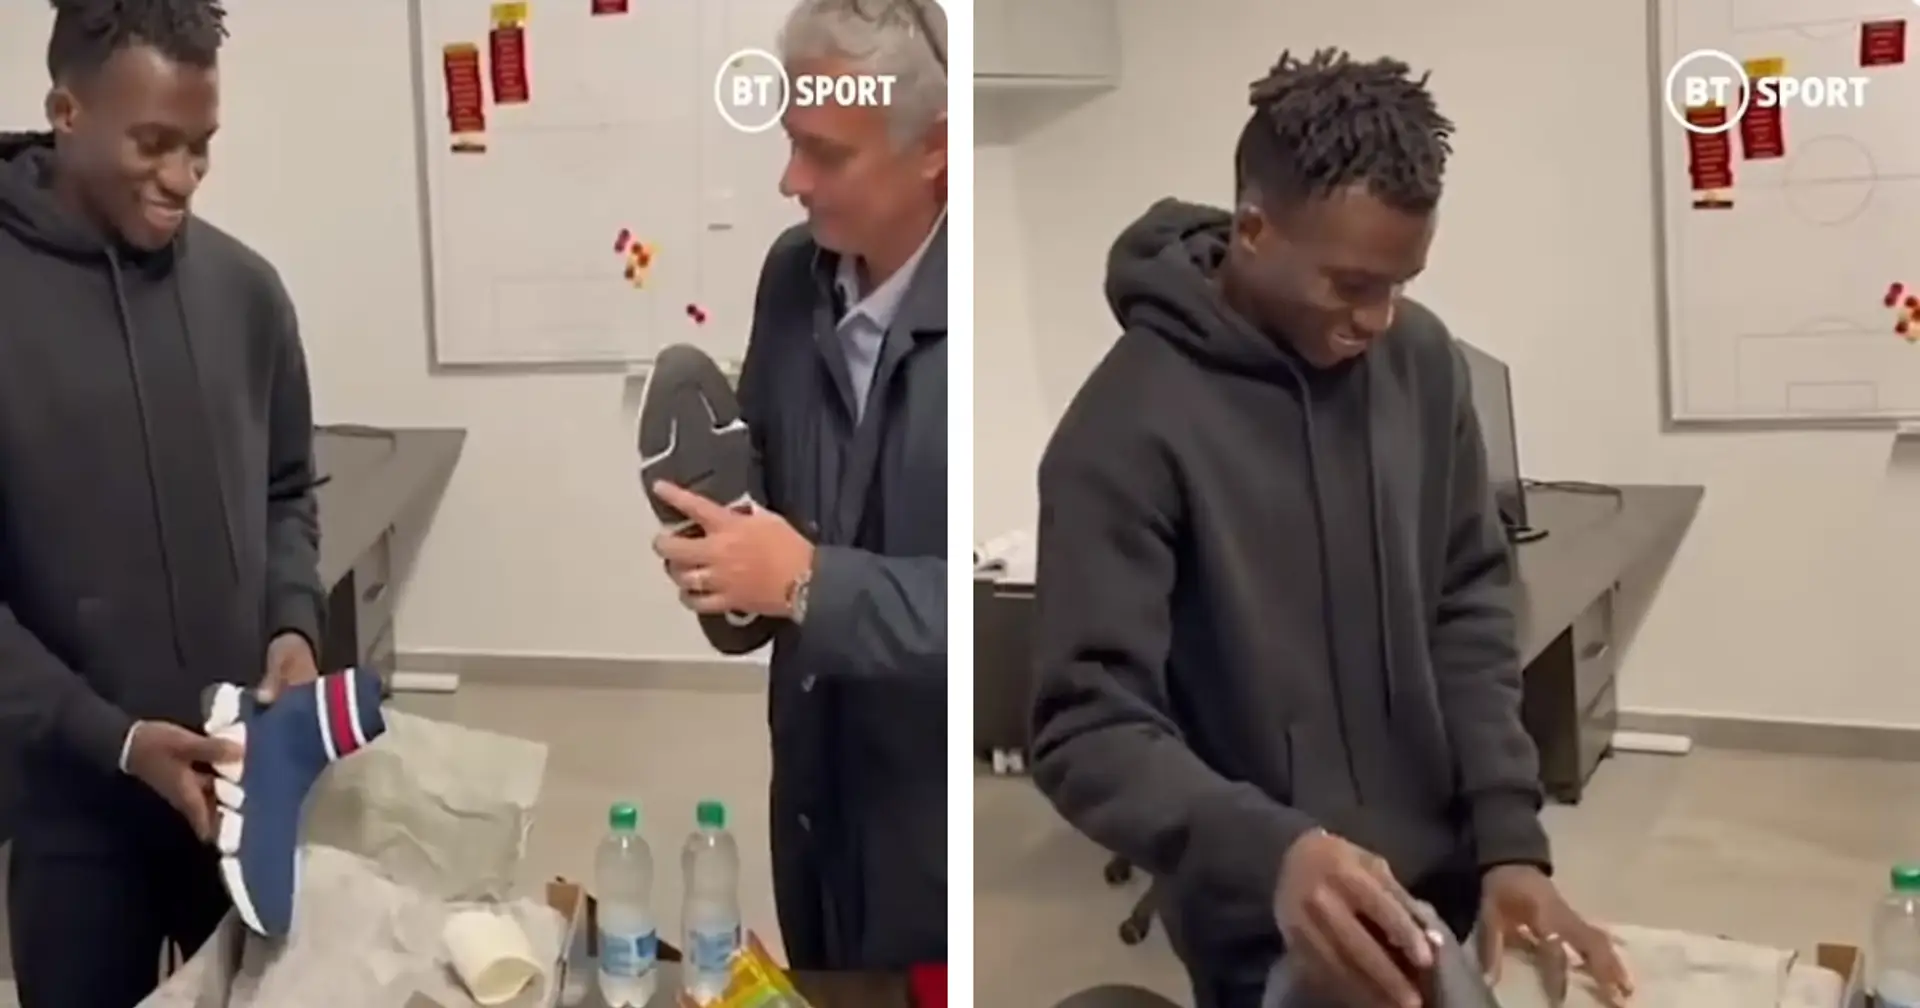 'I eat bananas a lot': Roma starlet Felix Afena-Gyan explains bizarre comment from behind the scenes video